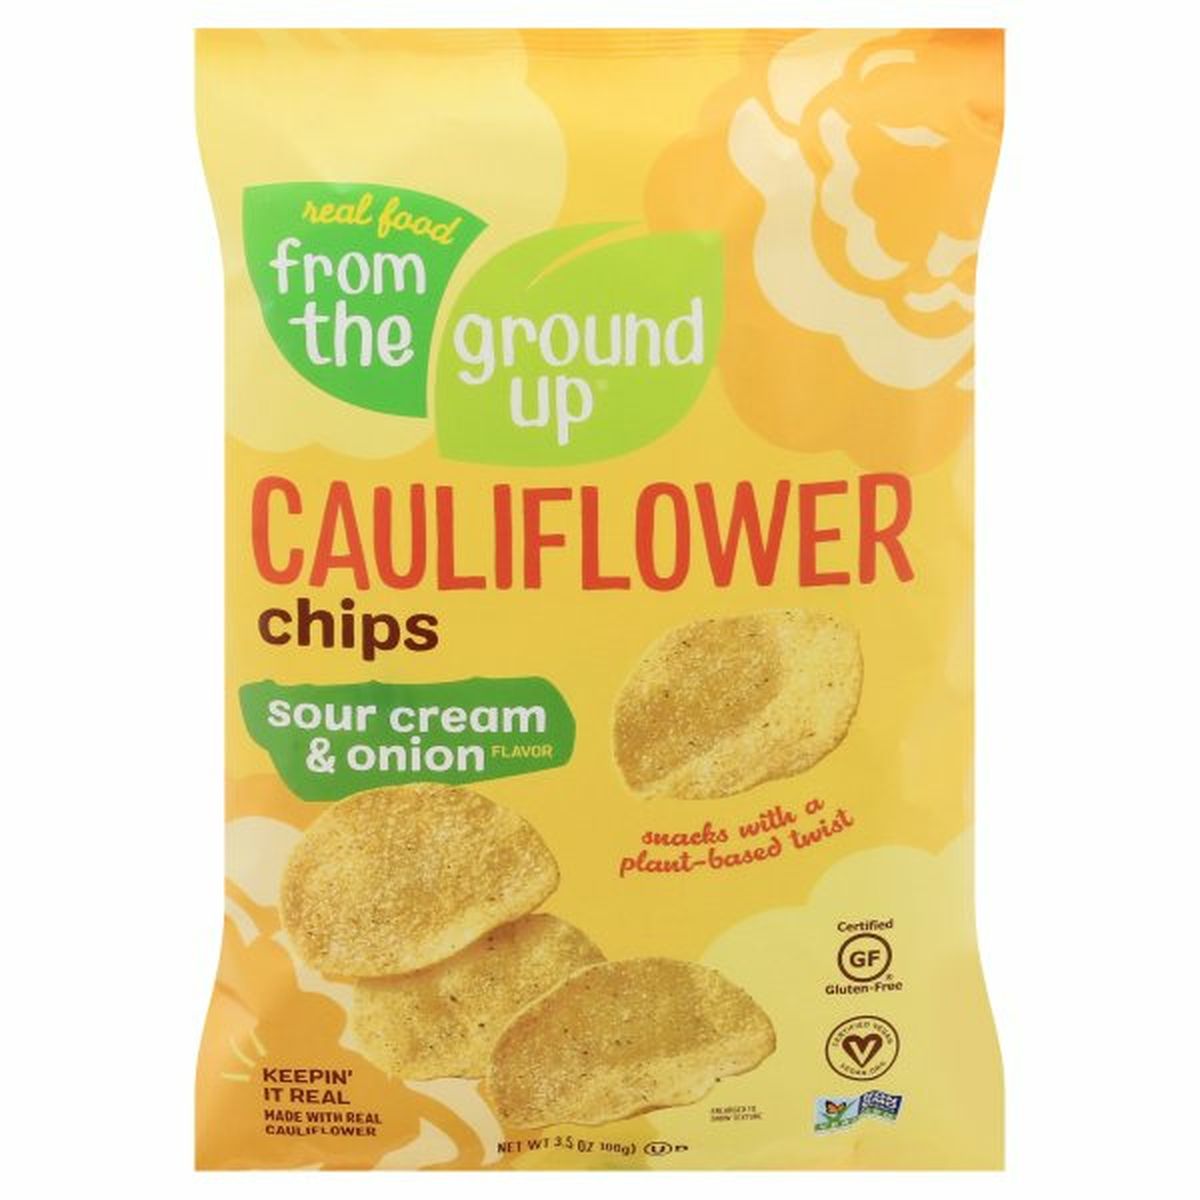 Calories in From the Ground Up Cauliflower Chips, Sour Cream & Onion Flavor